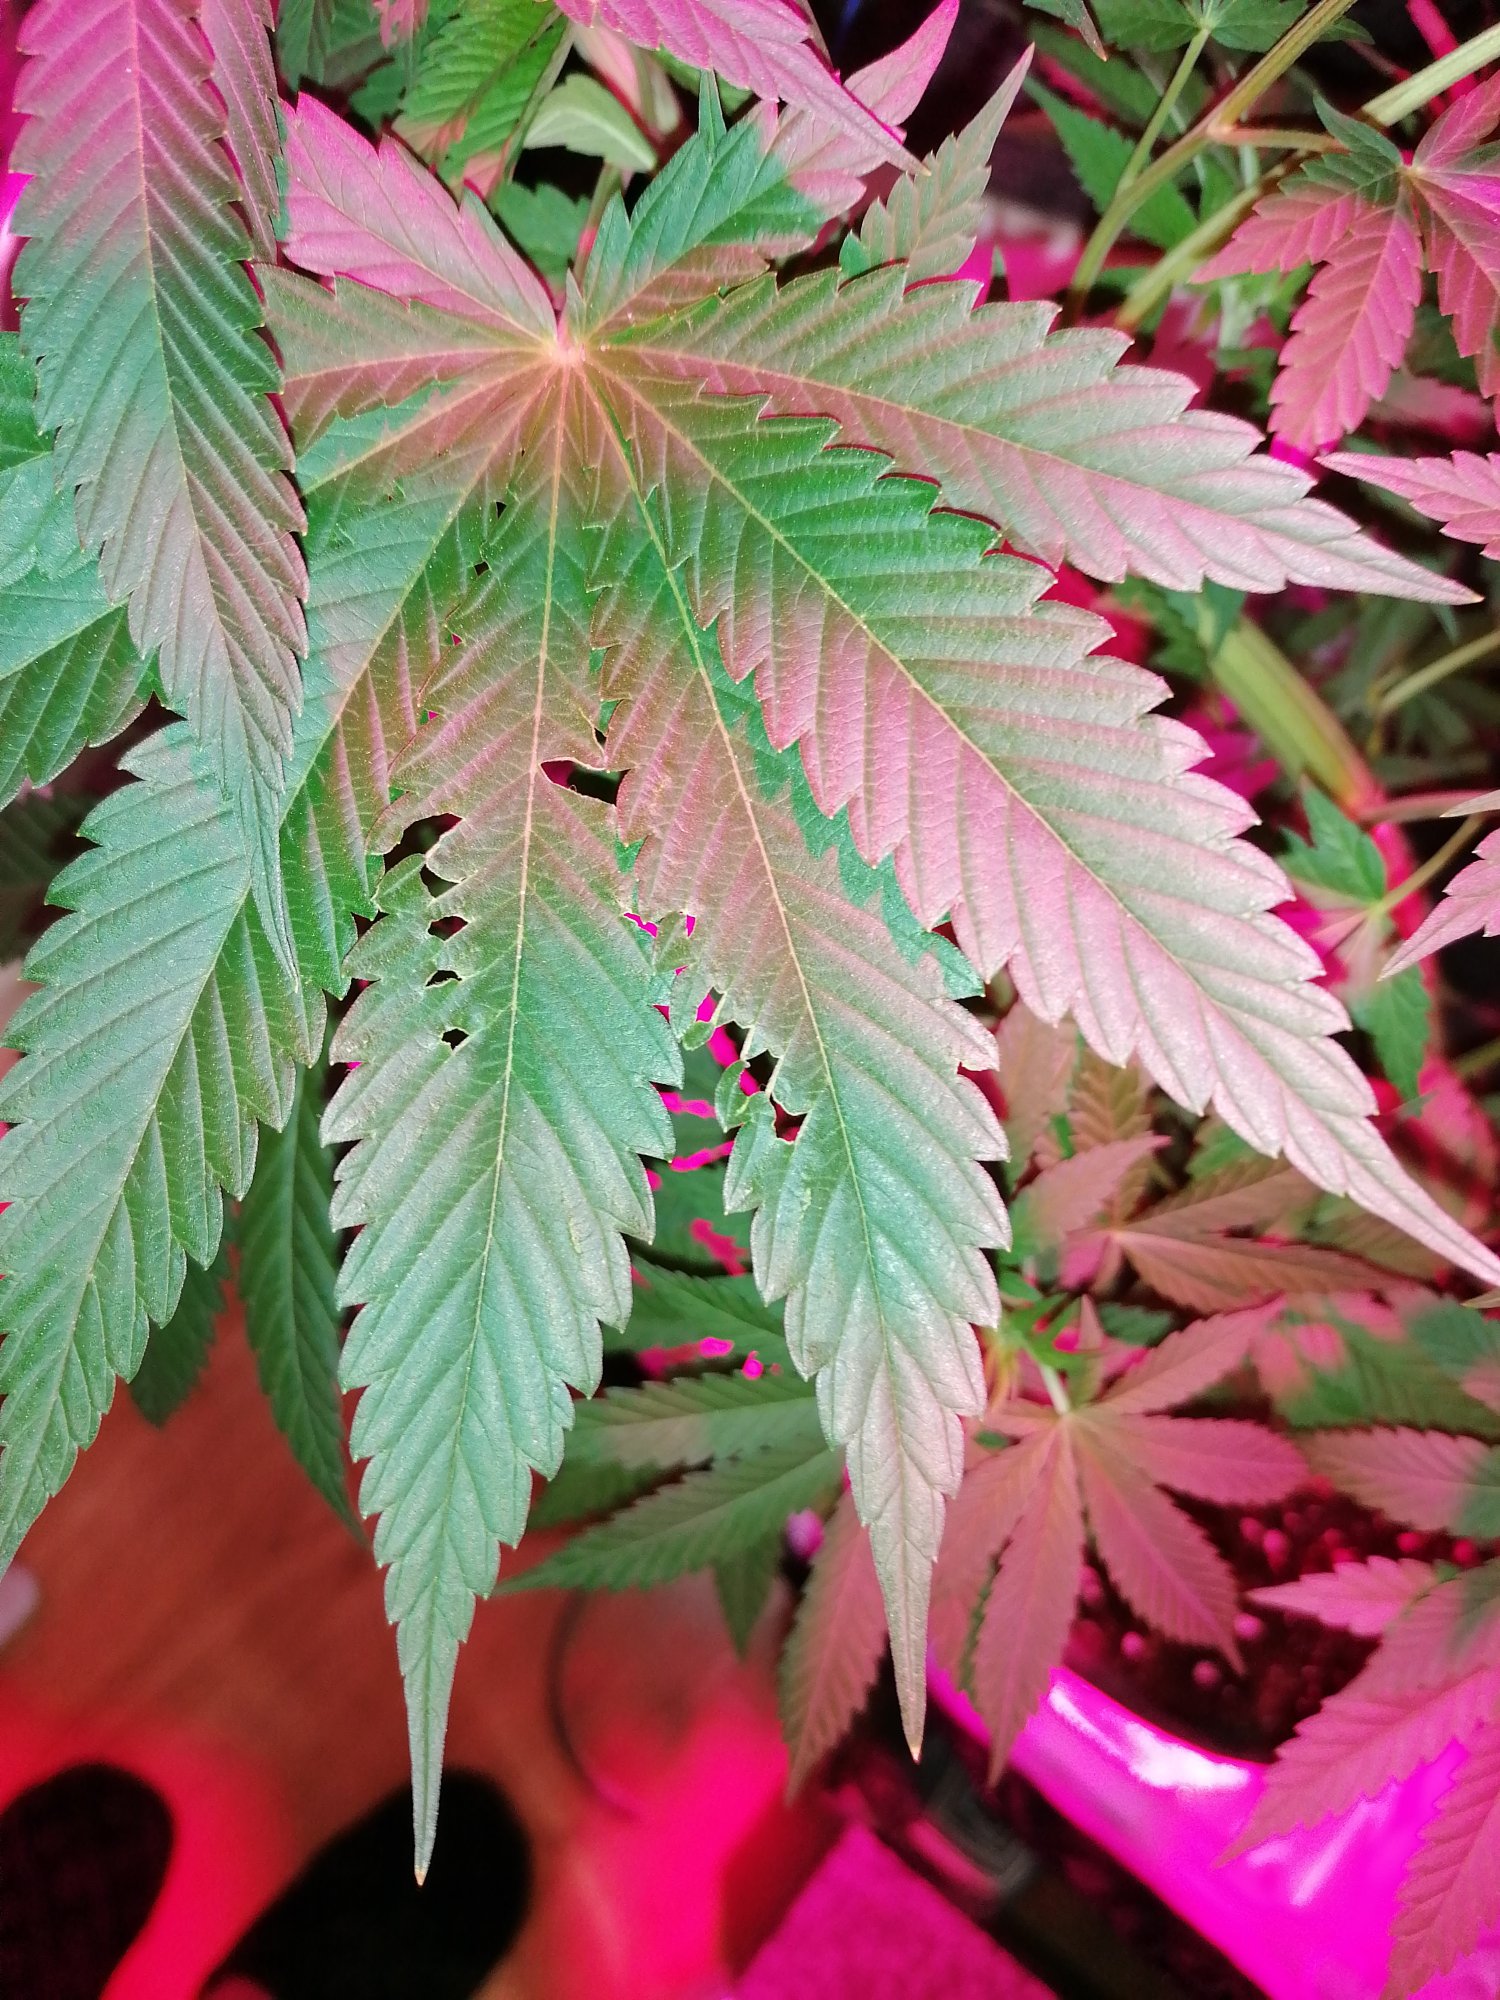 Help me is my first grow